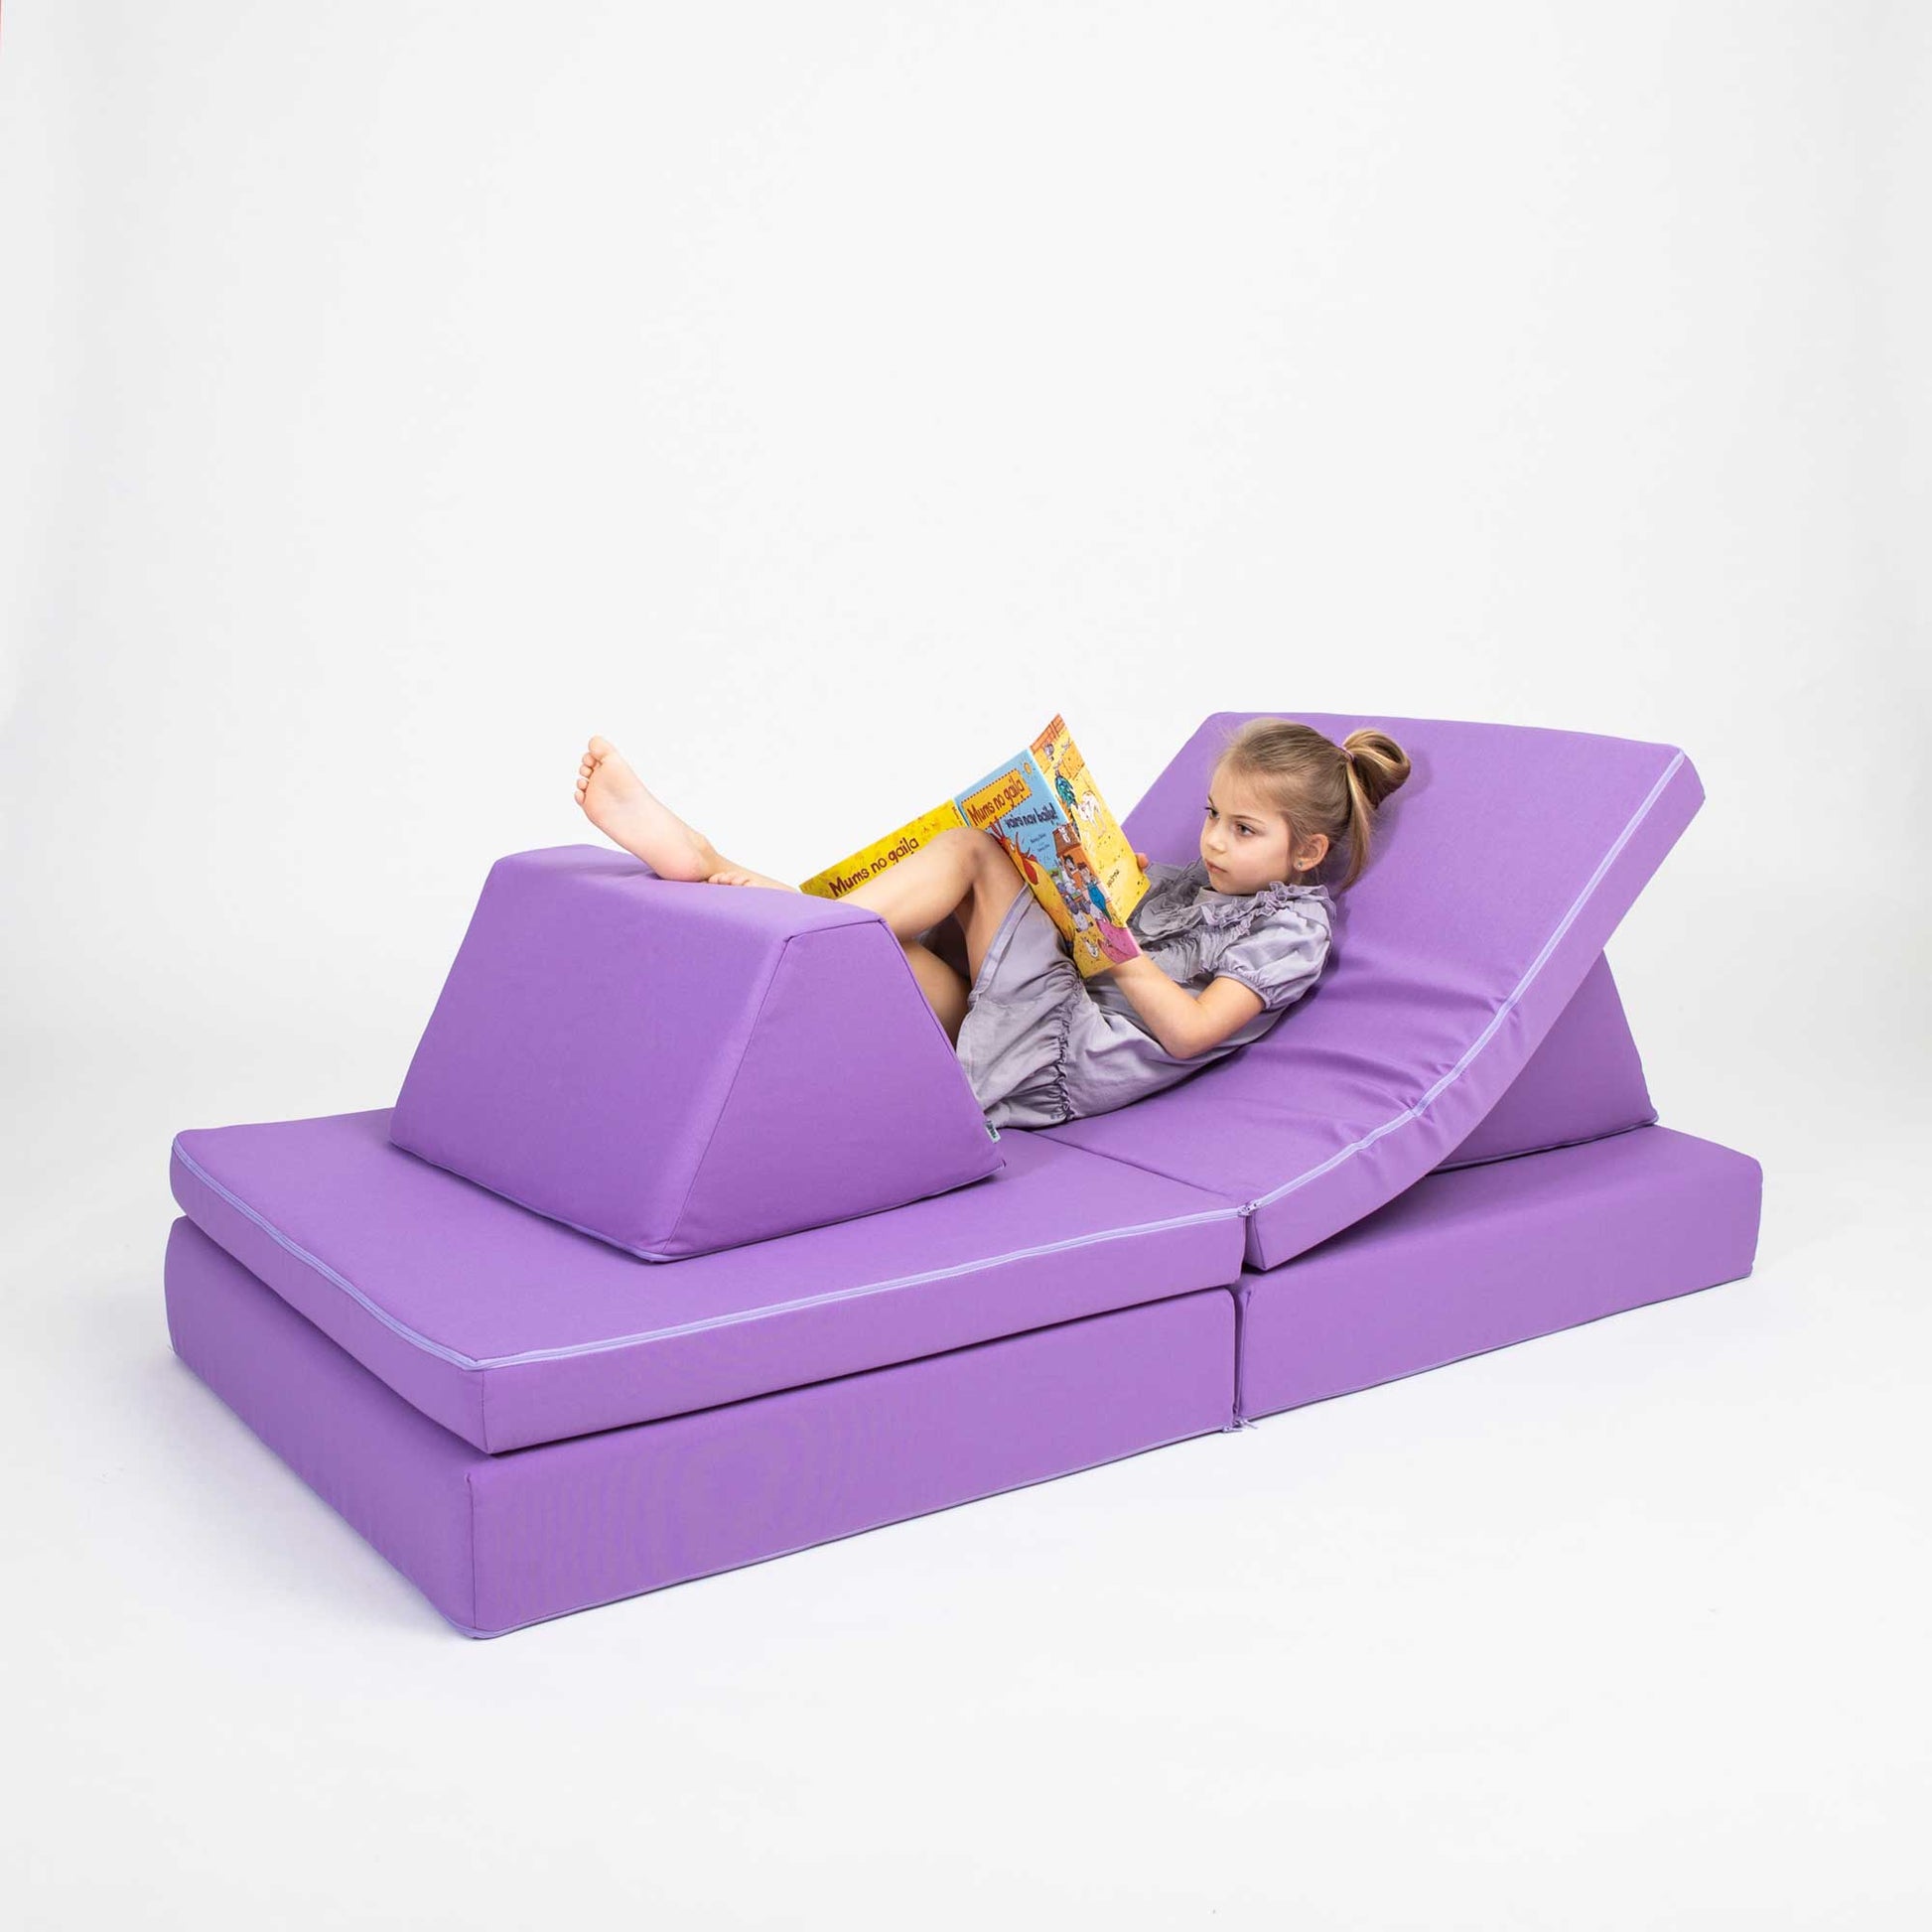 A girl laying down and reading on a purple Monboxy foam couch blocks set